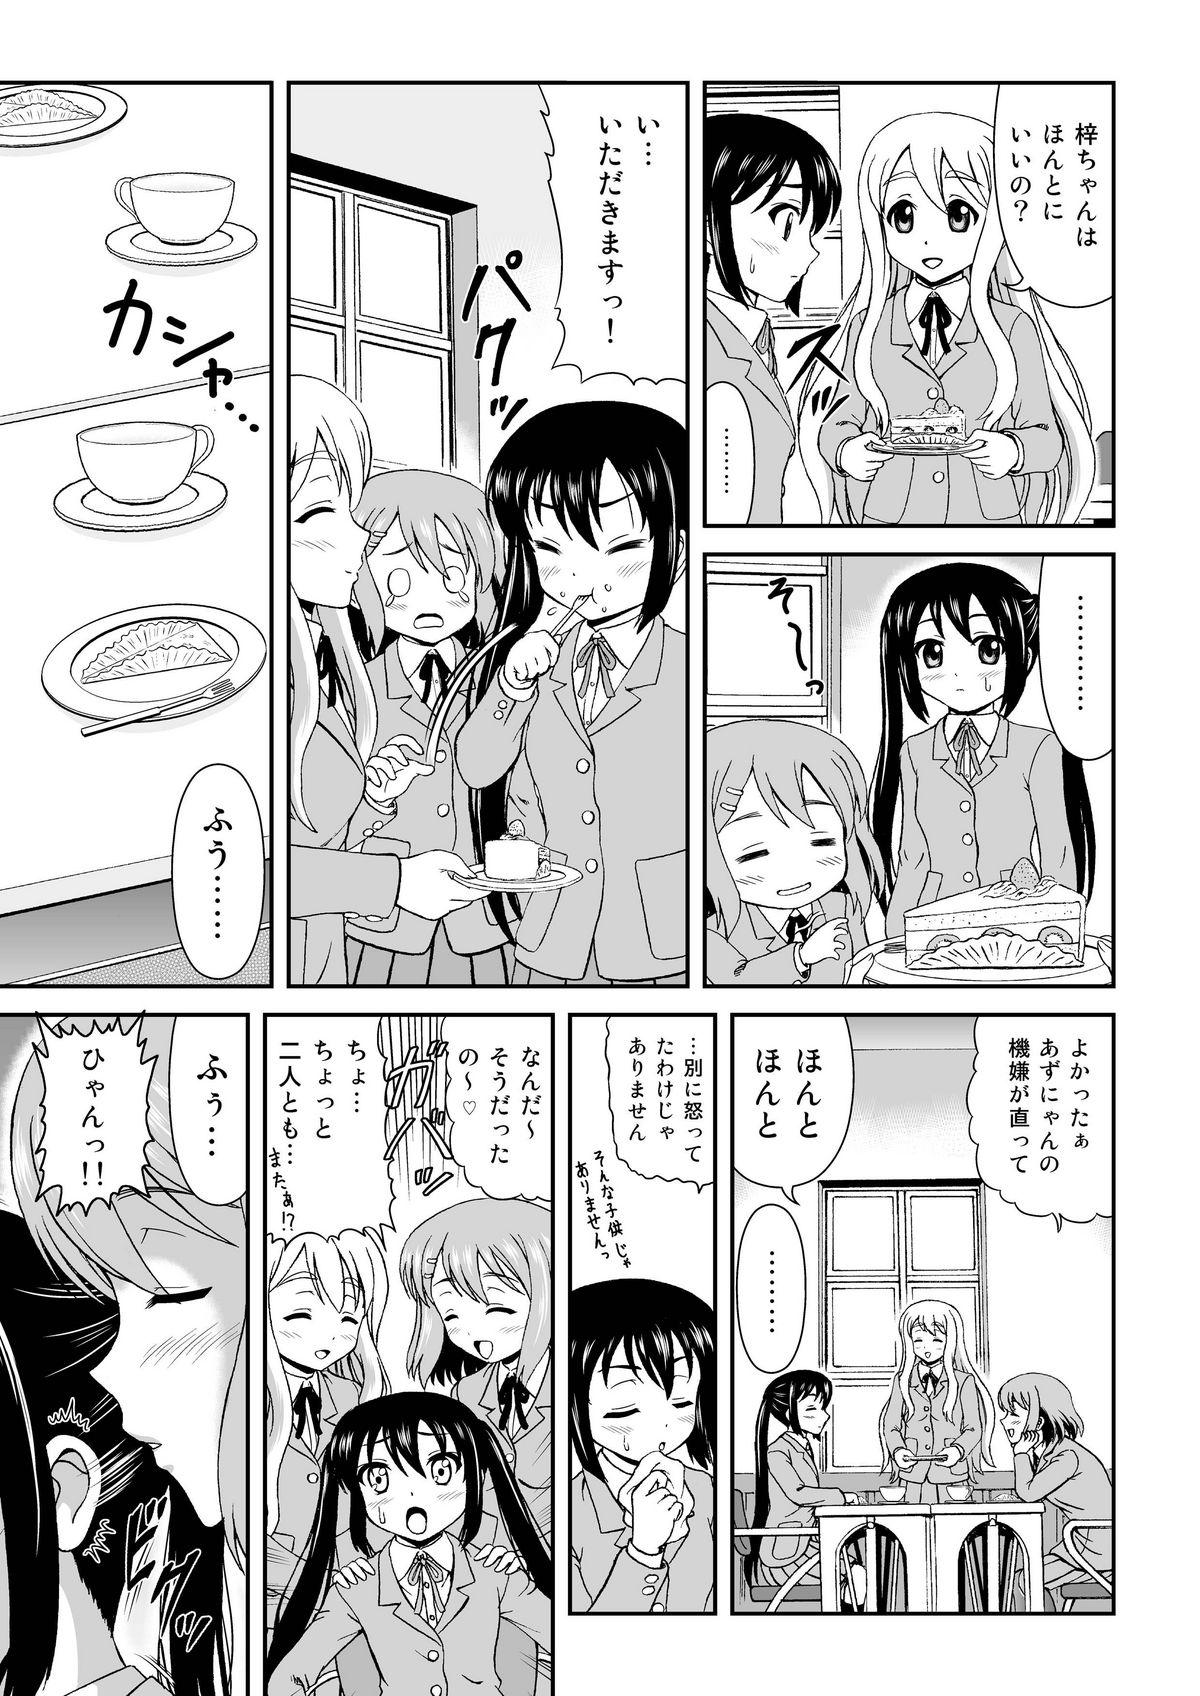 Stretching Houkago Off Time - K-on 18yo - Page 9